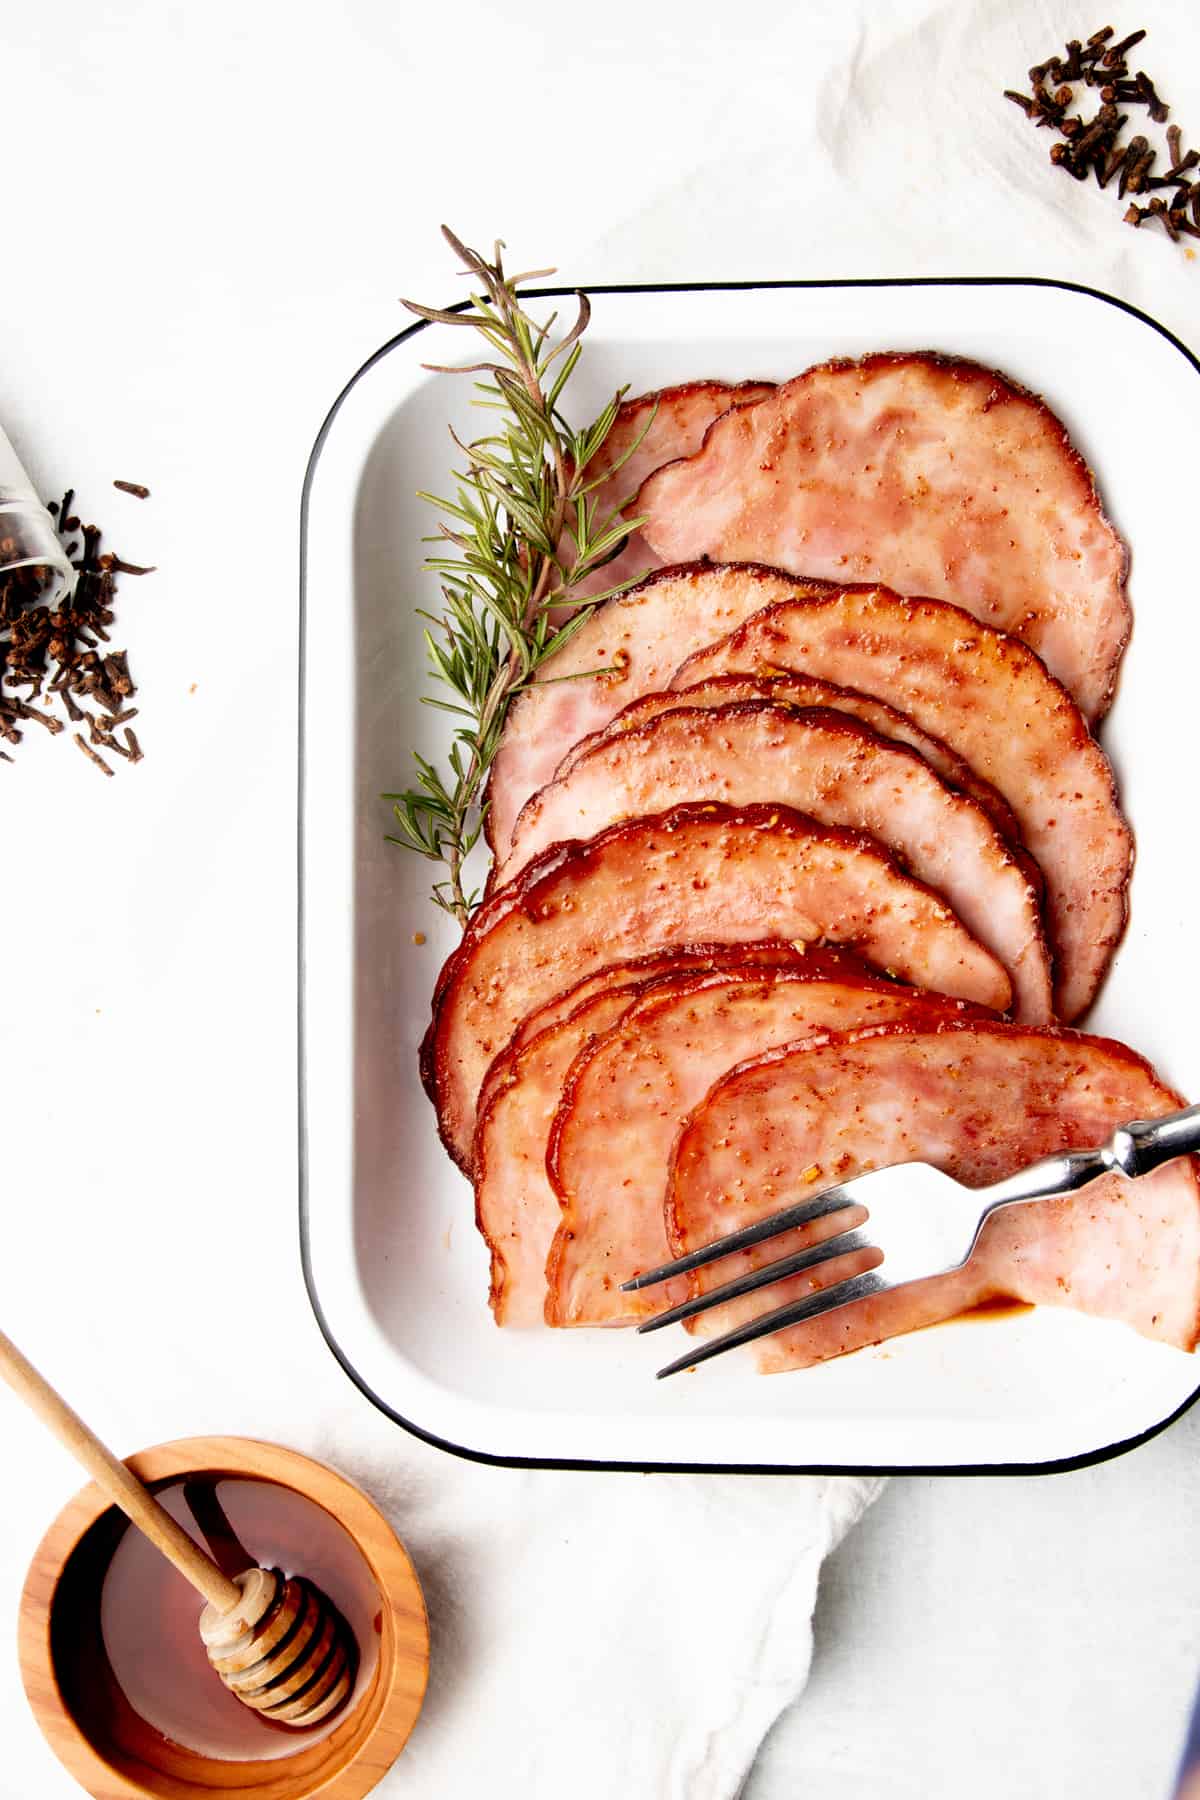 Sliced slow cooker ham rests in a white dish. A sprig of rosemary sits in the top left corner of the dish.